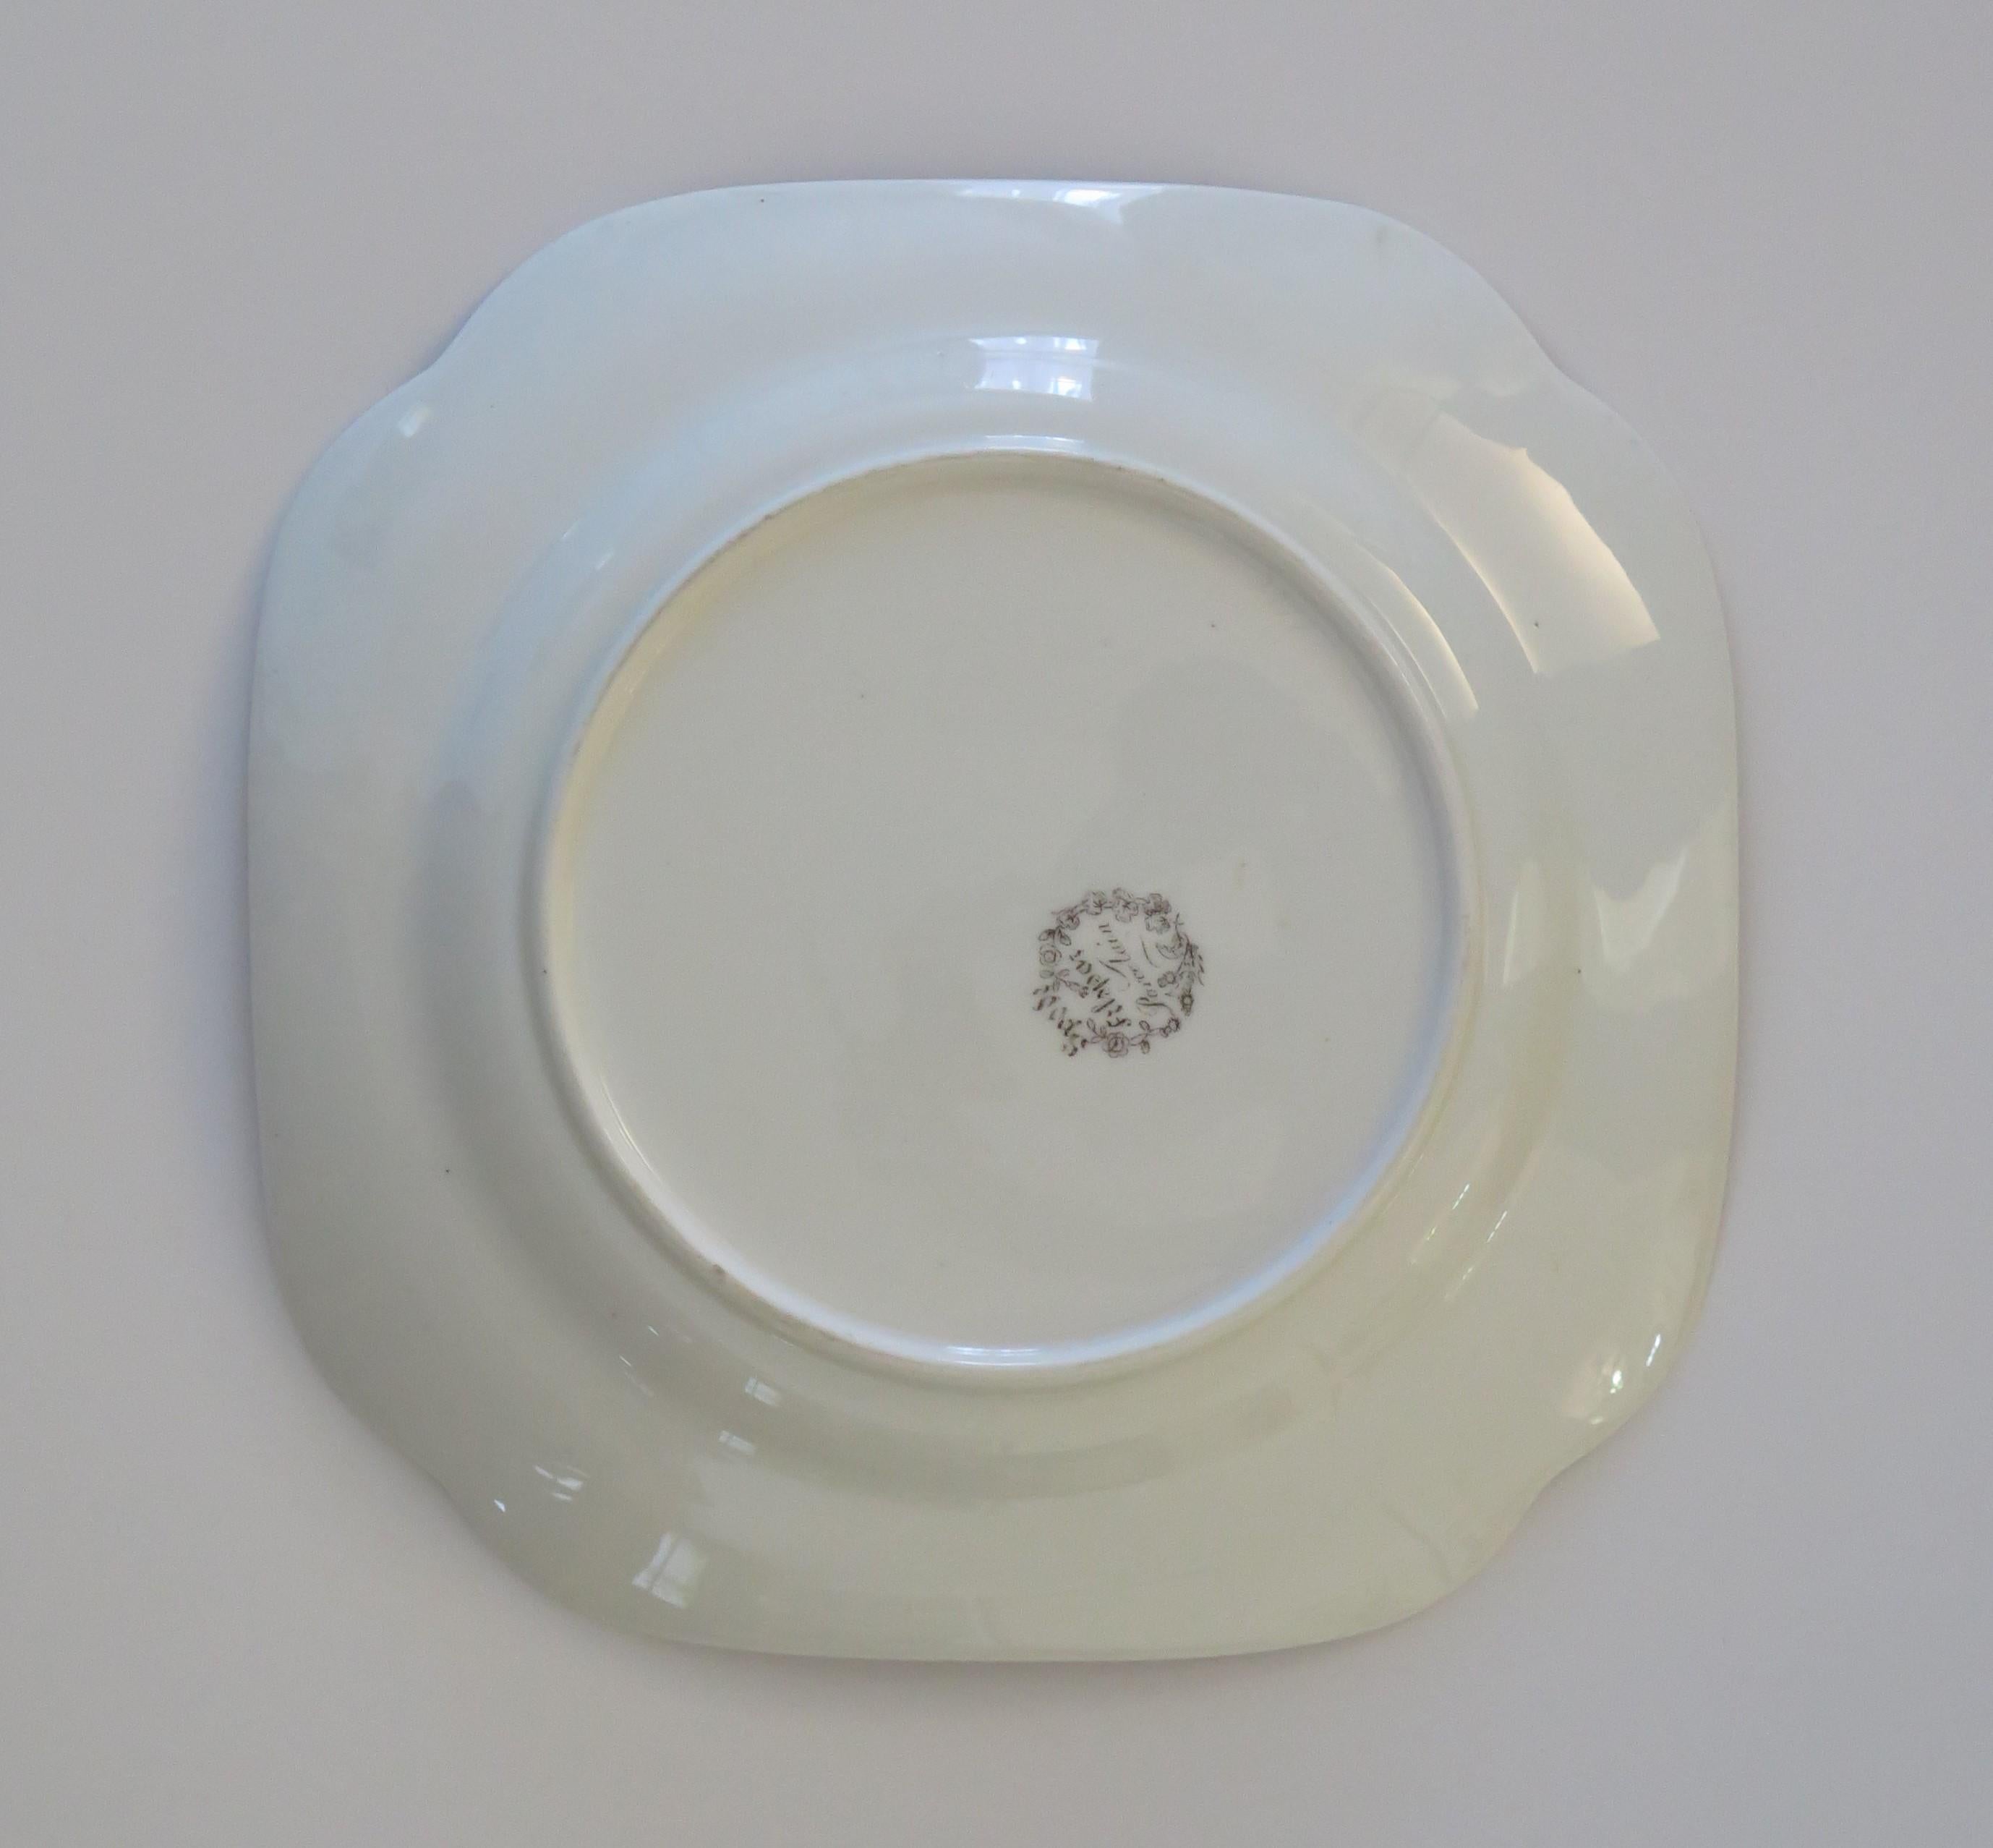 Georgian Spode Plate or Dish Chinoiserie Pattern No. 1867 porcelain, circa 1820 For Sale 4